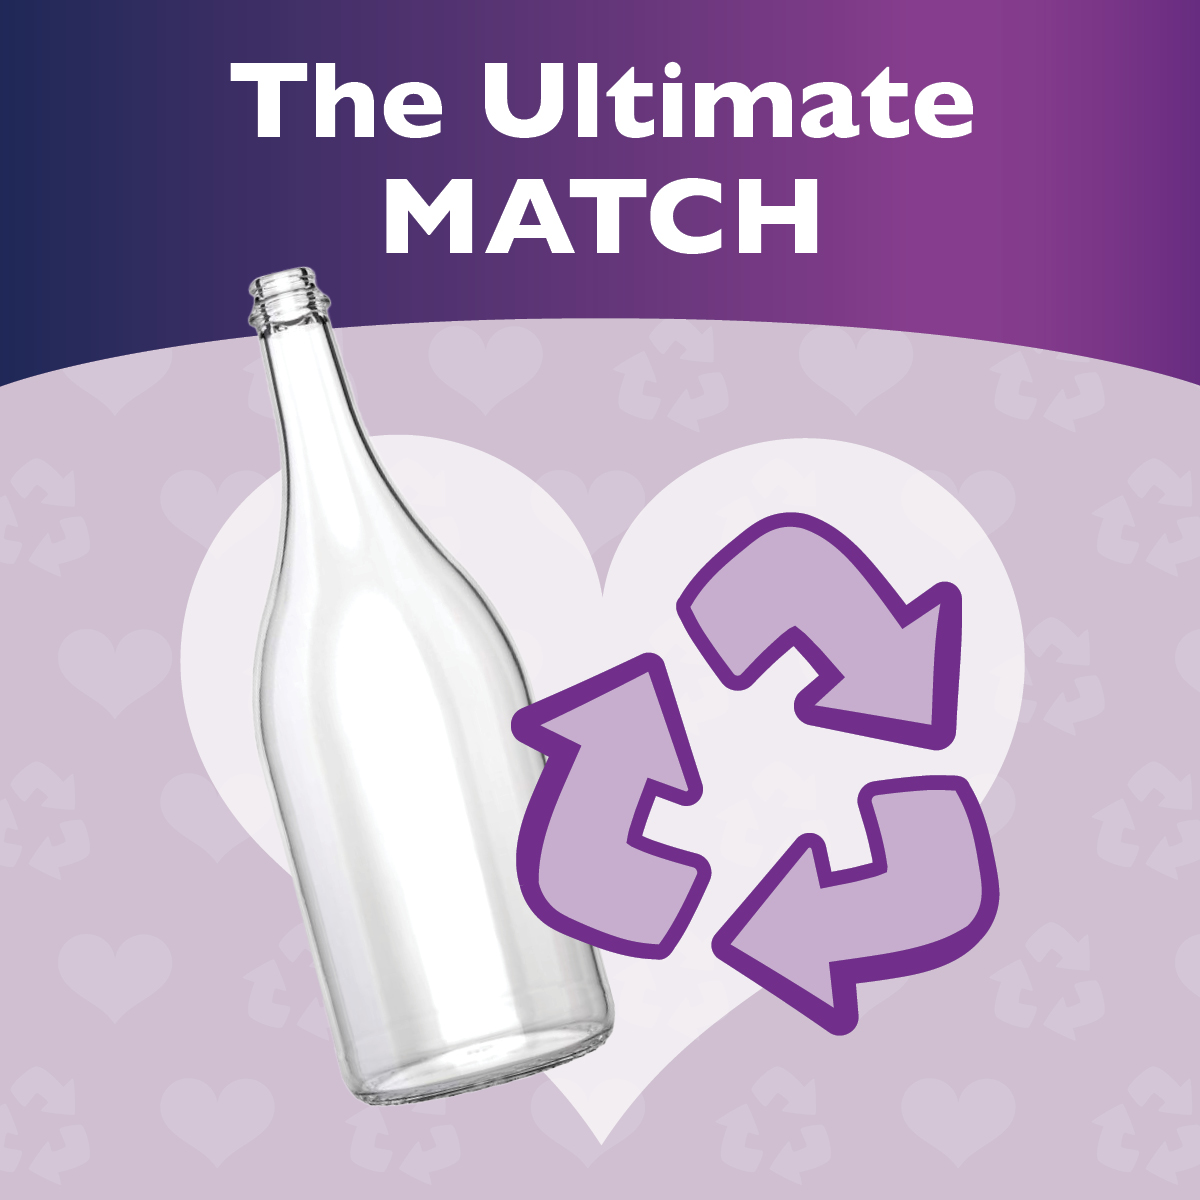 Glass is 100% and infinitely recyclable - meaning it can be recycled over and over again without a loss in quality. Now that's a #perfectmatch! #valentinesday #thatslove #chooseglass #packaginglove